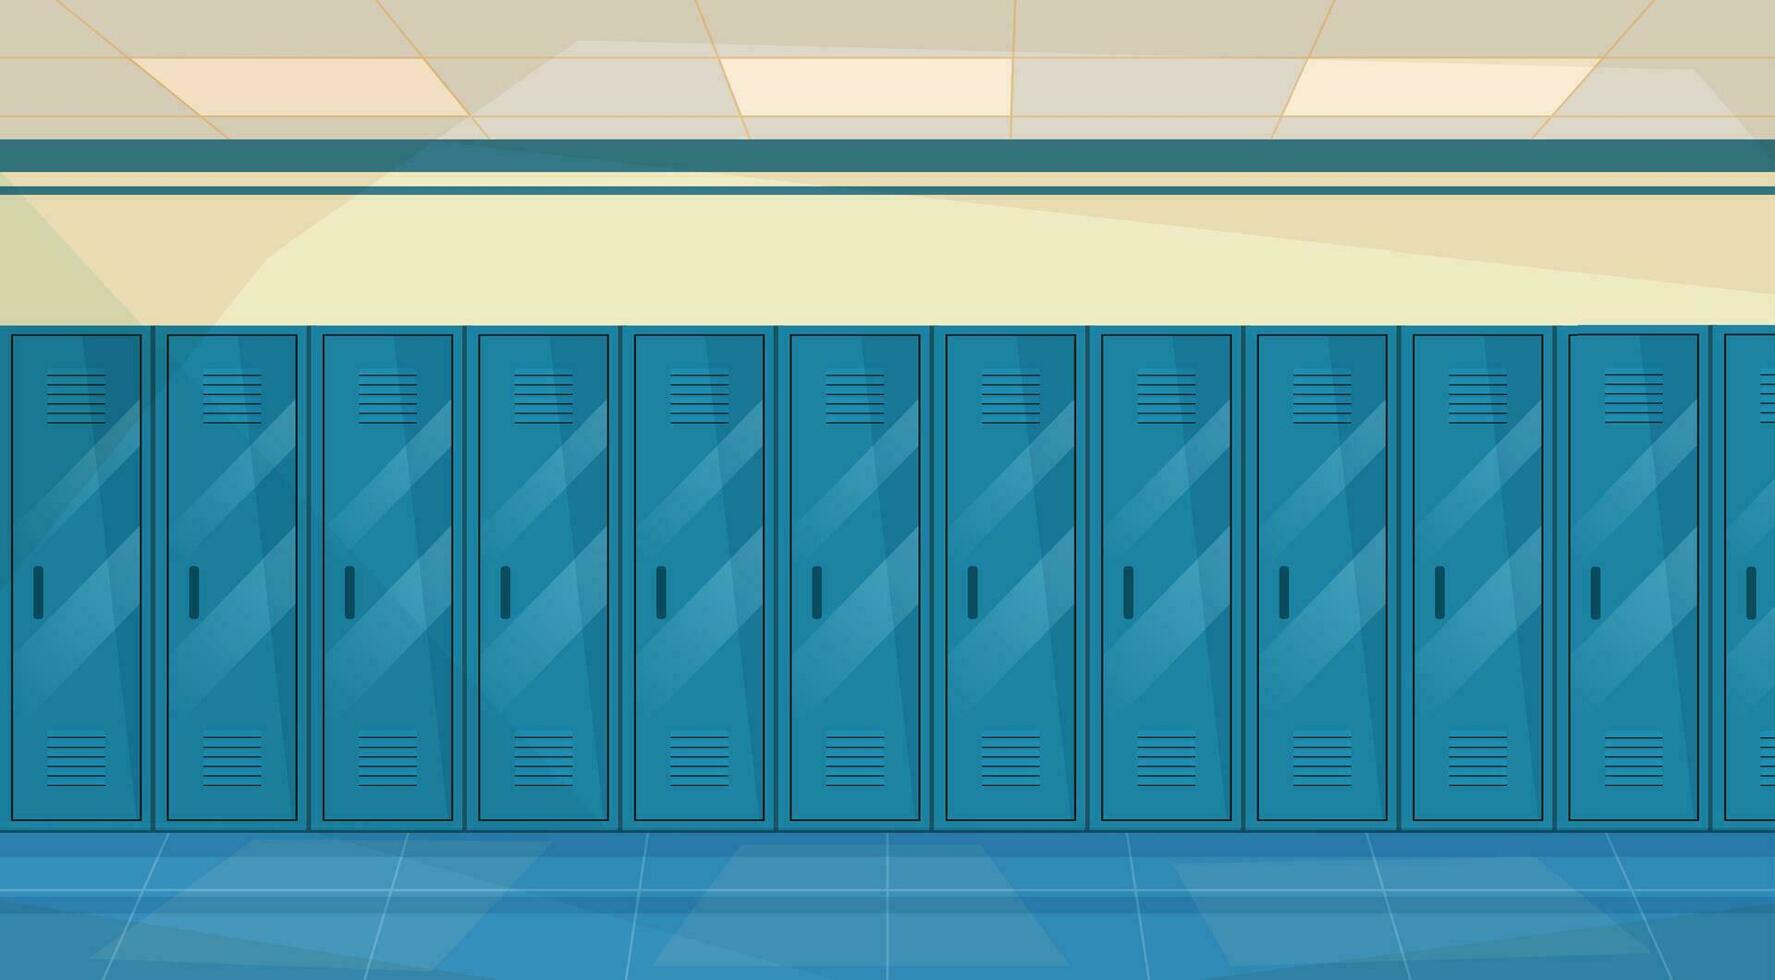 Empty School Corridor Interior With Row Of Lockers Horizontal Banner. cartoon Dressing place a fitness club. Vector illustration in a flat style